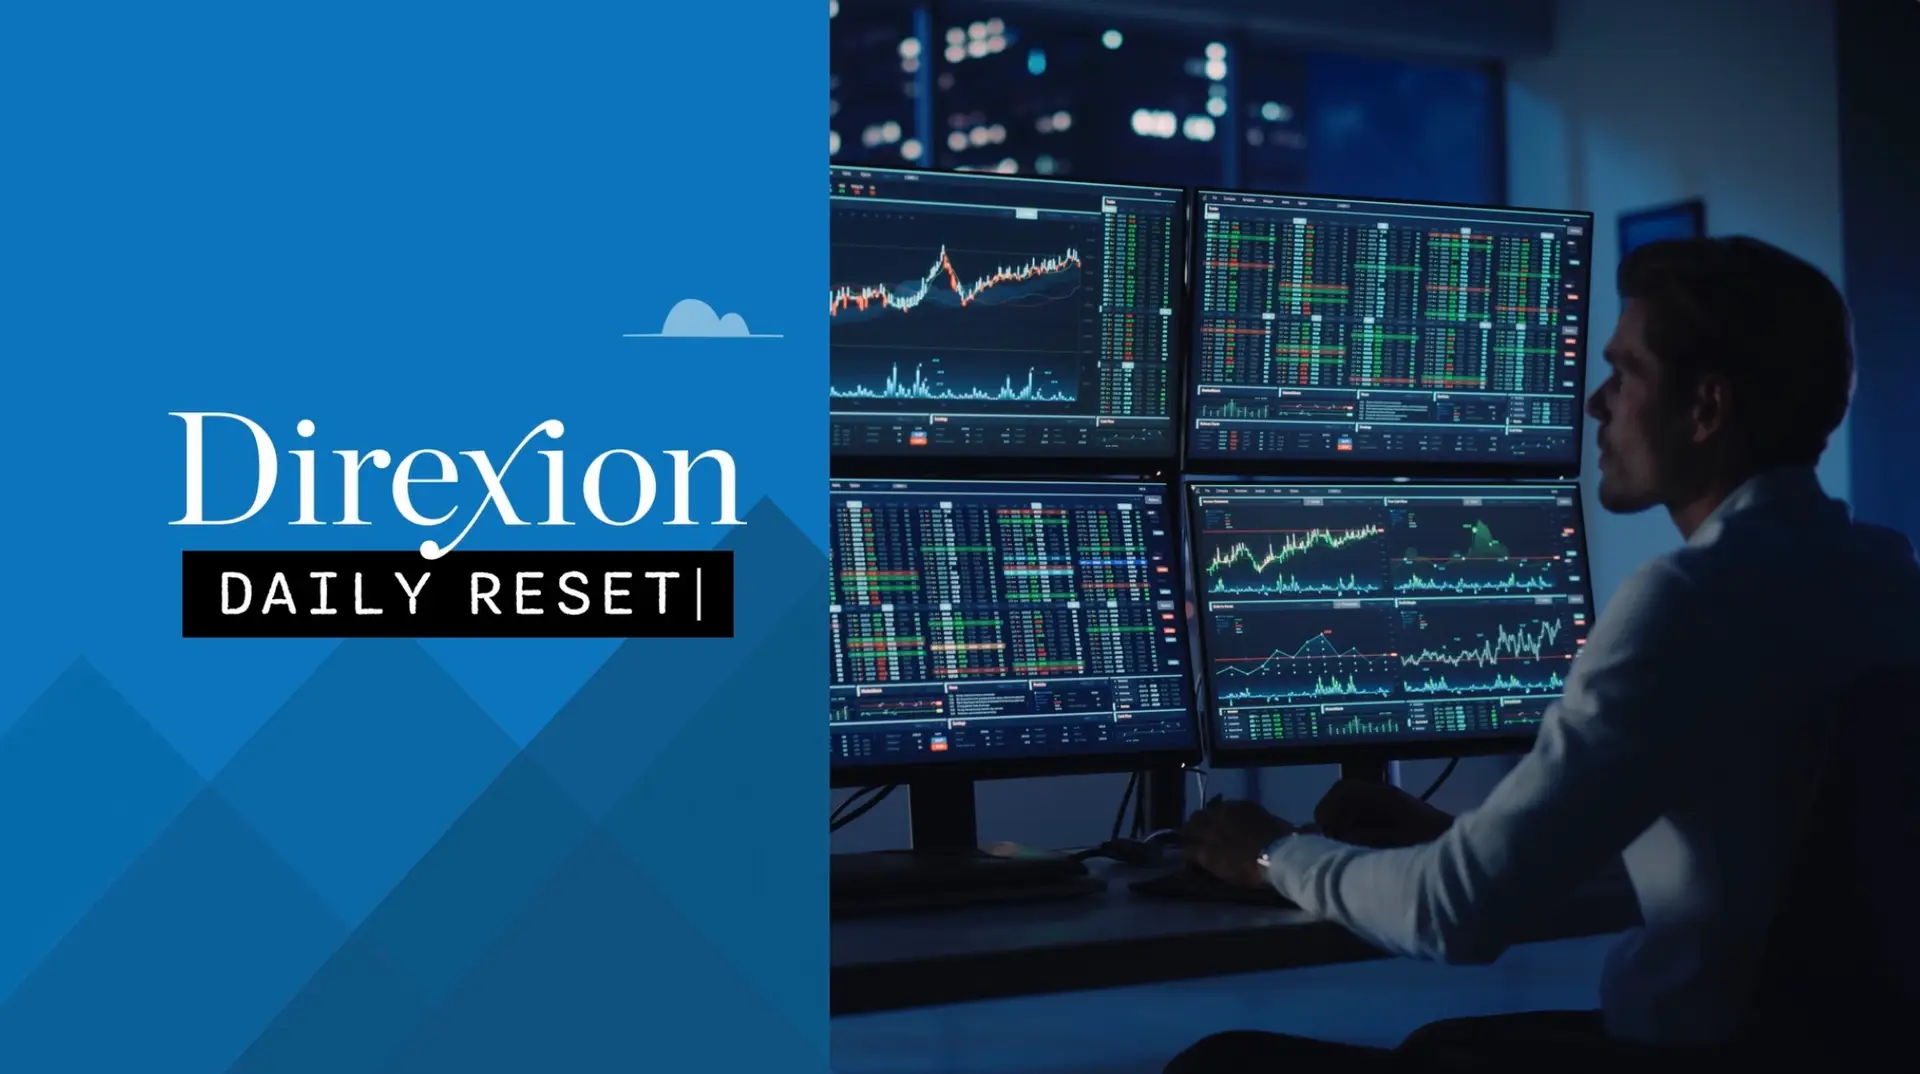 A man is sitting at a computer screen reviewing the Direxion Daily Reset for a Client Case Study.